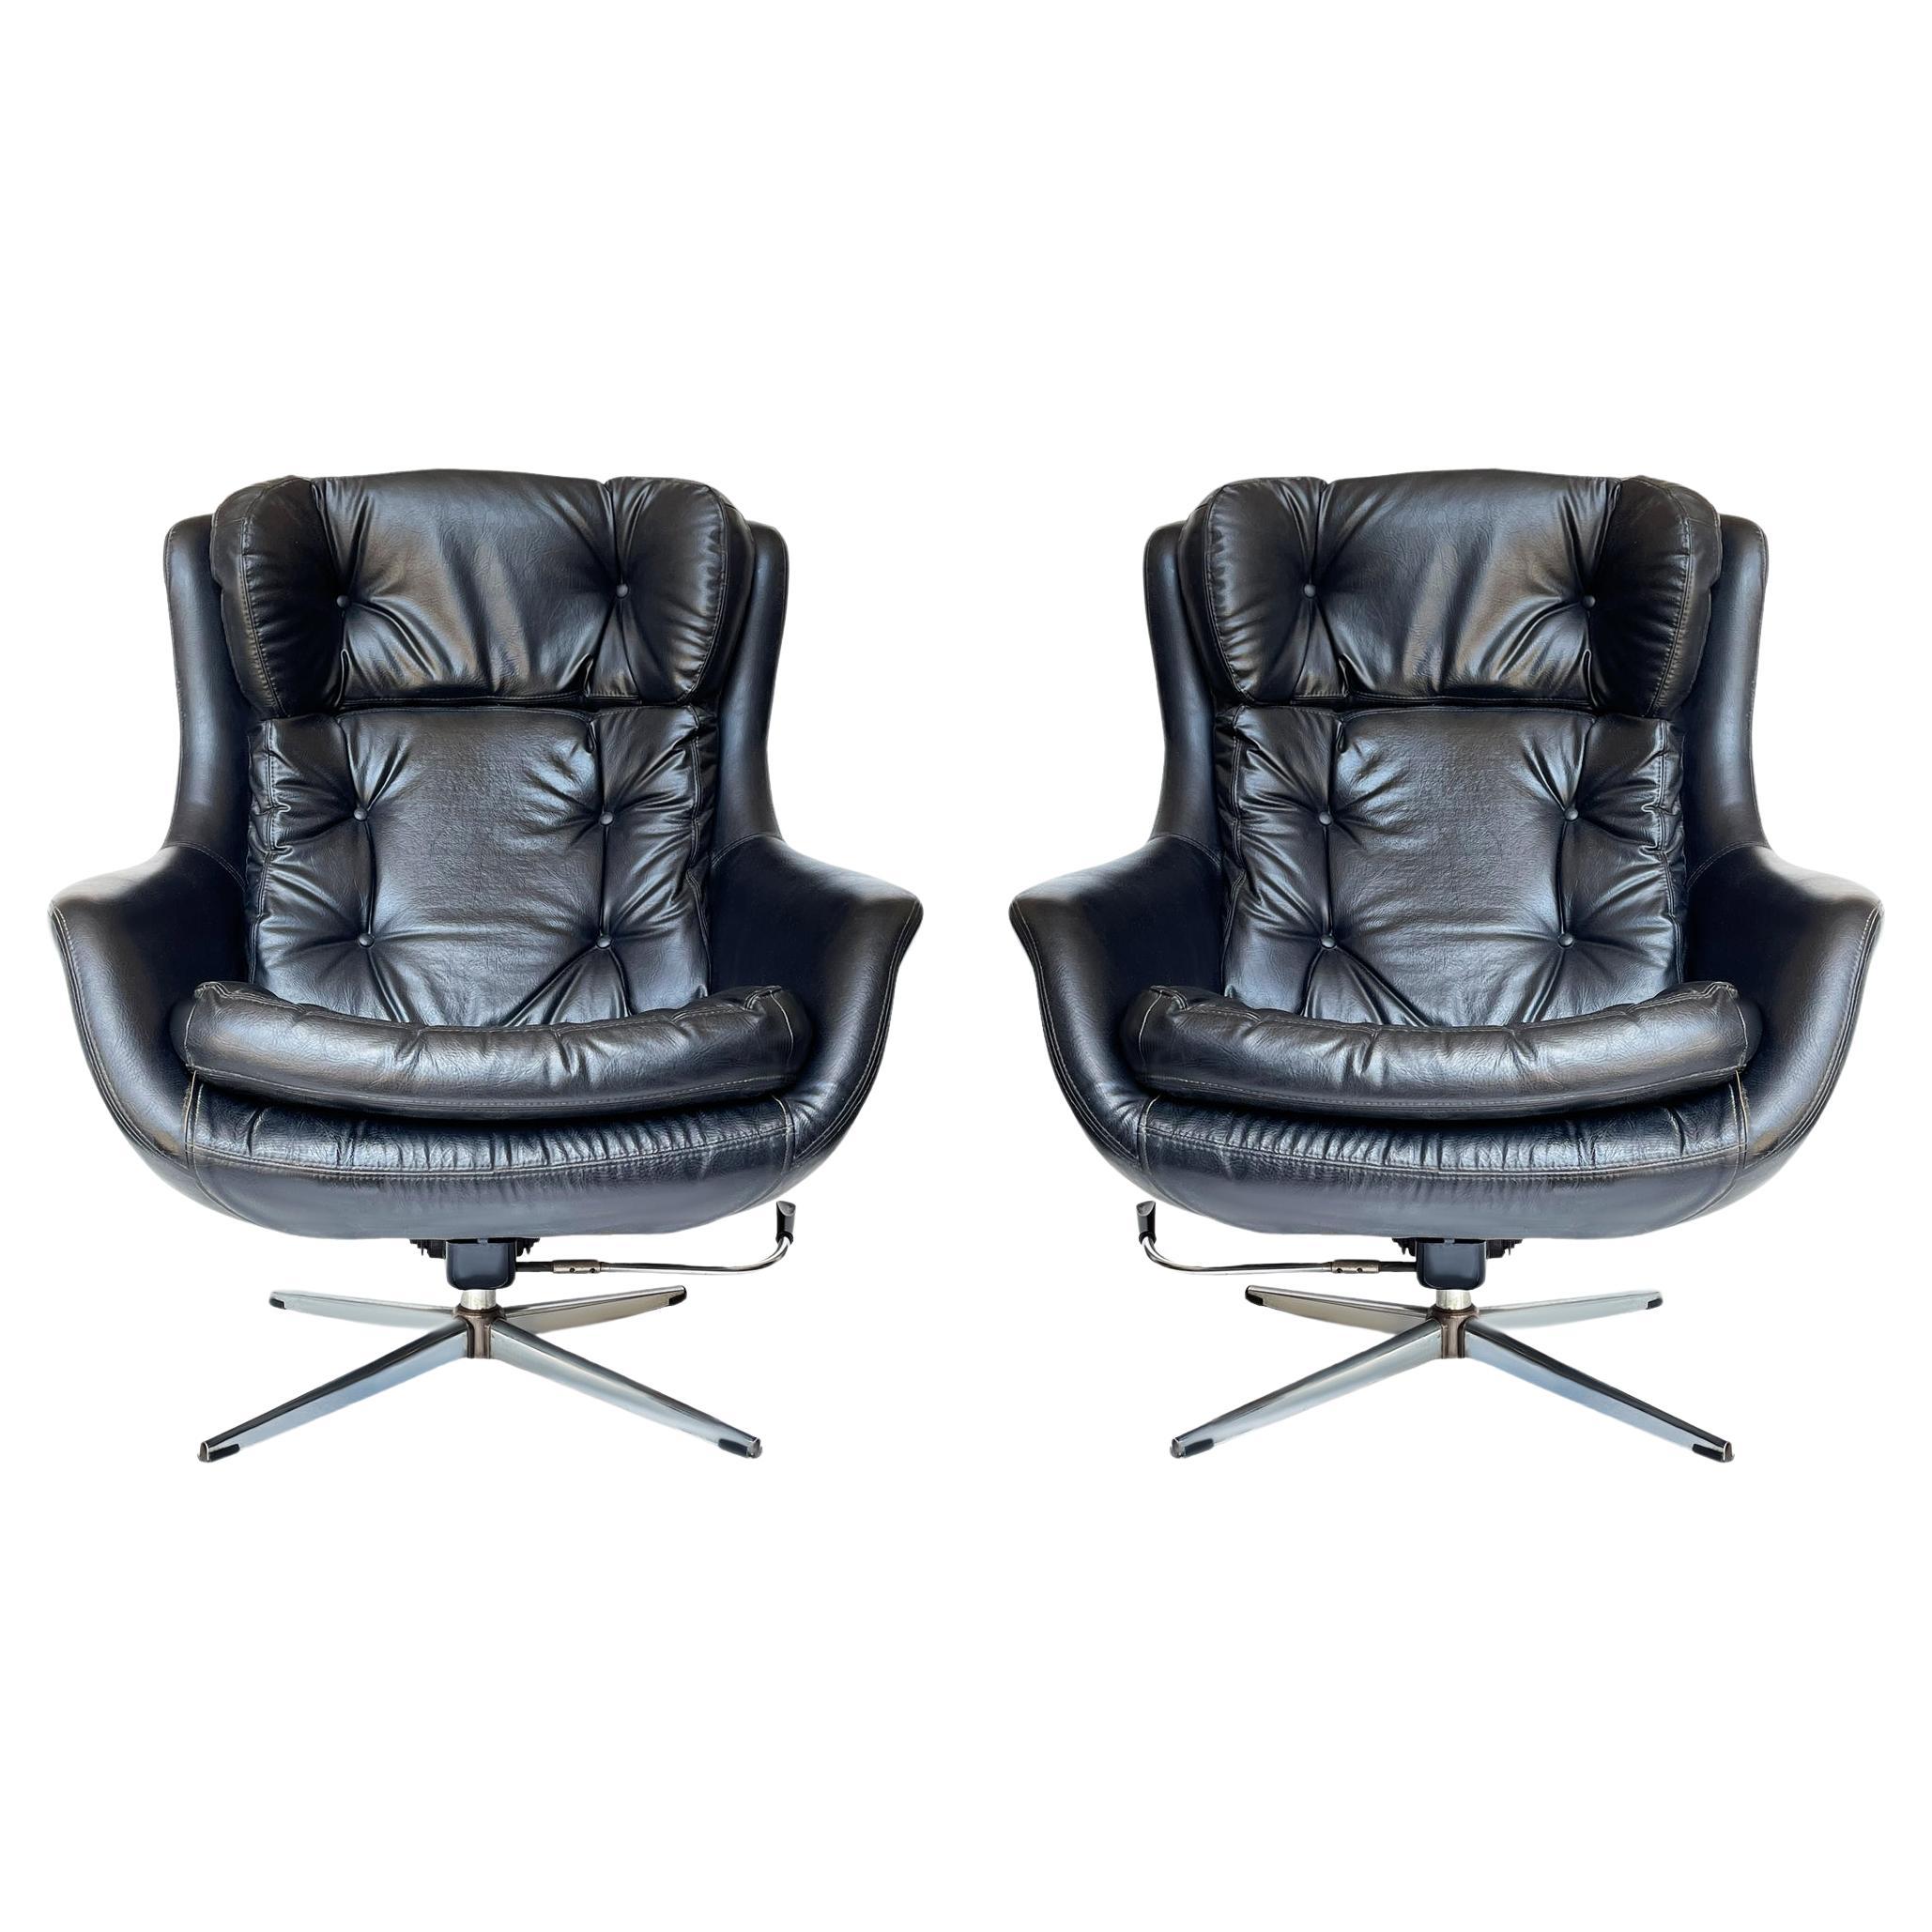 Pair of Mid Century Modern Black Swivel Lounge Chairs by Overman Sweden  For Sale